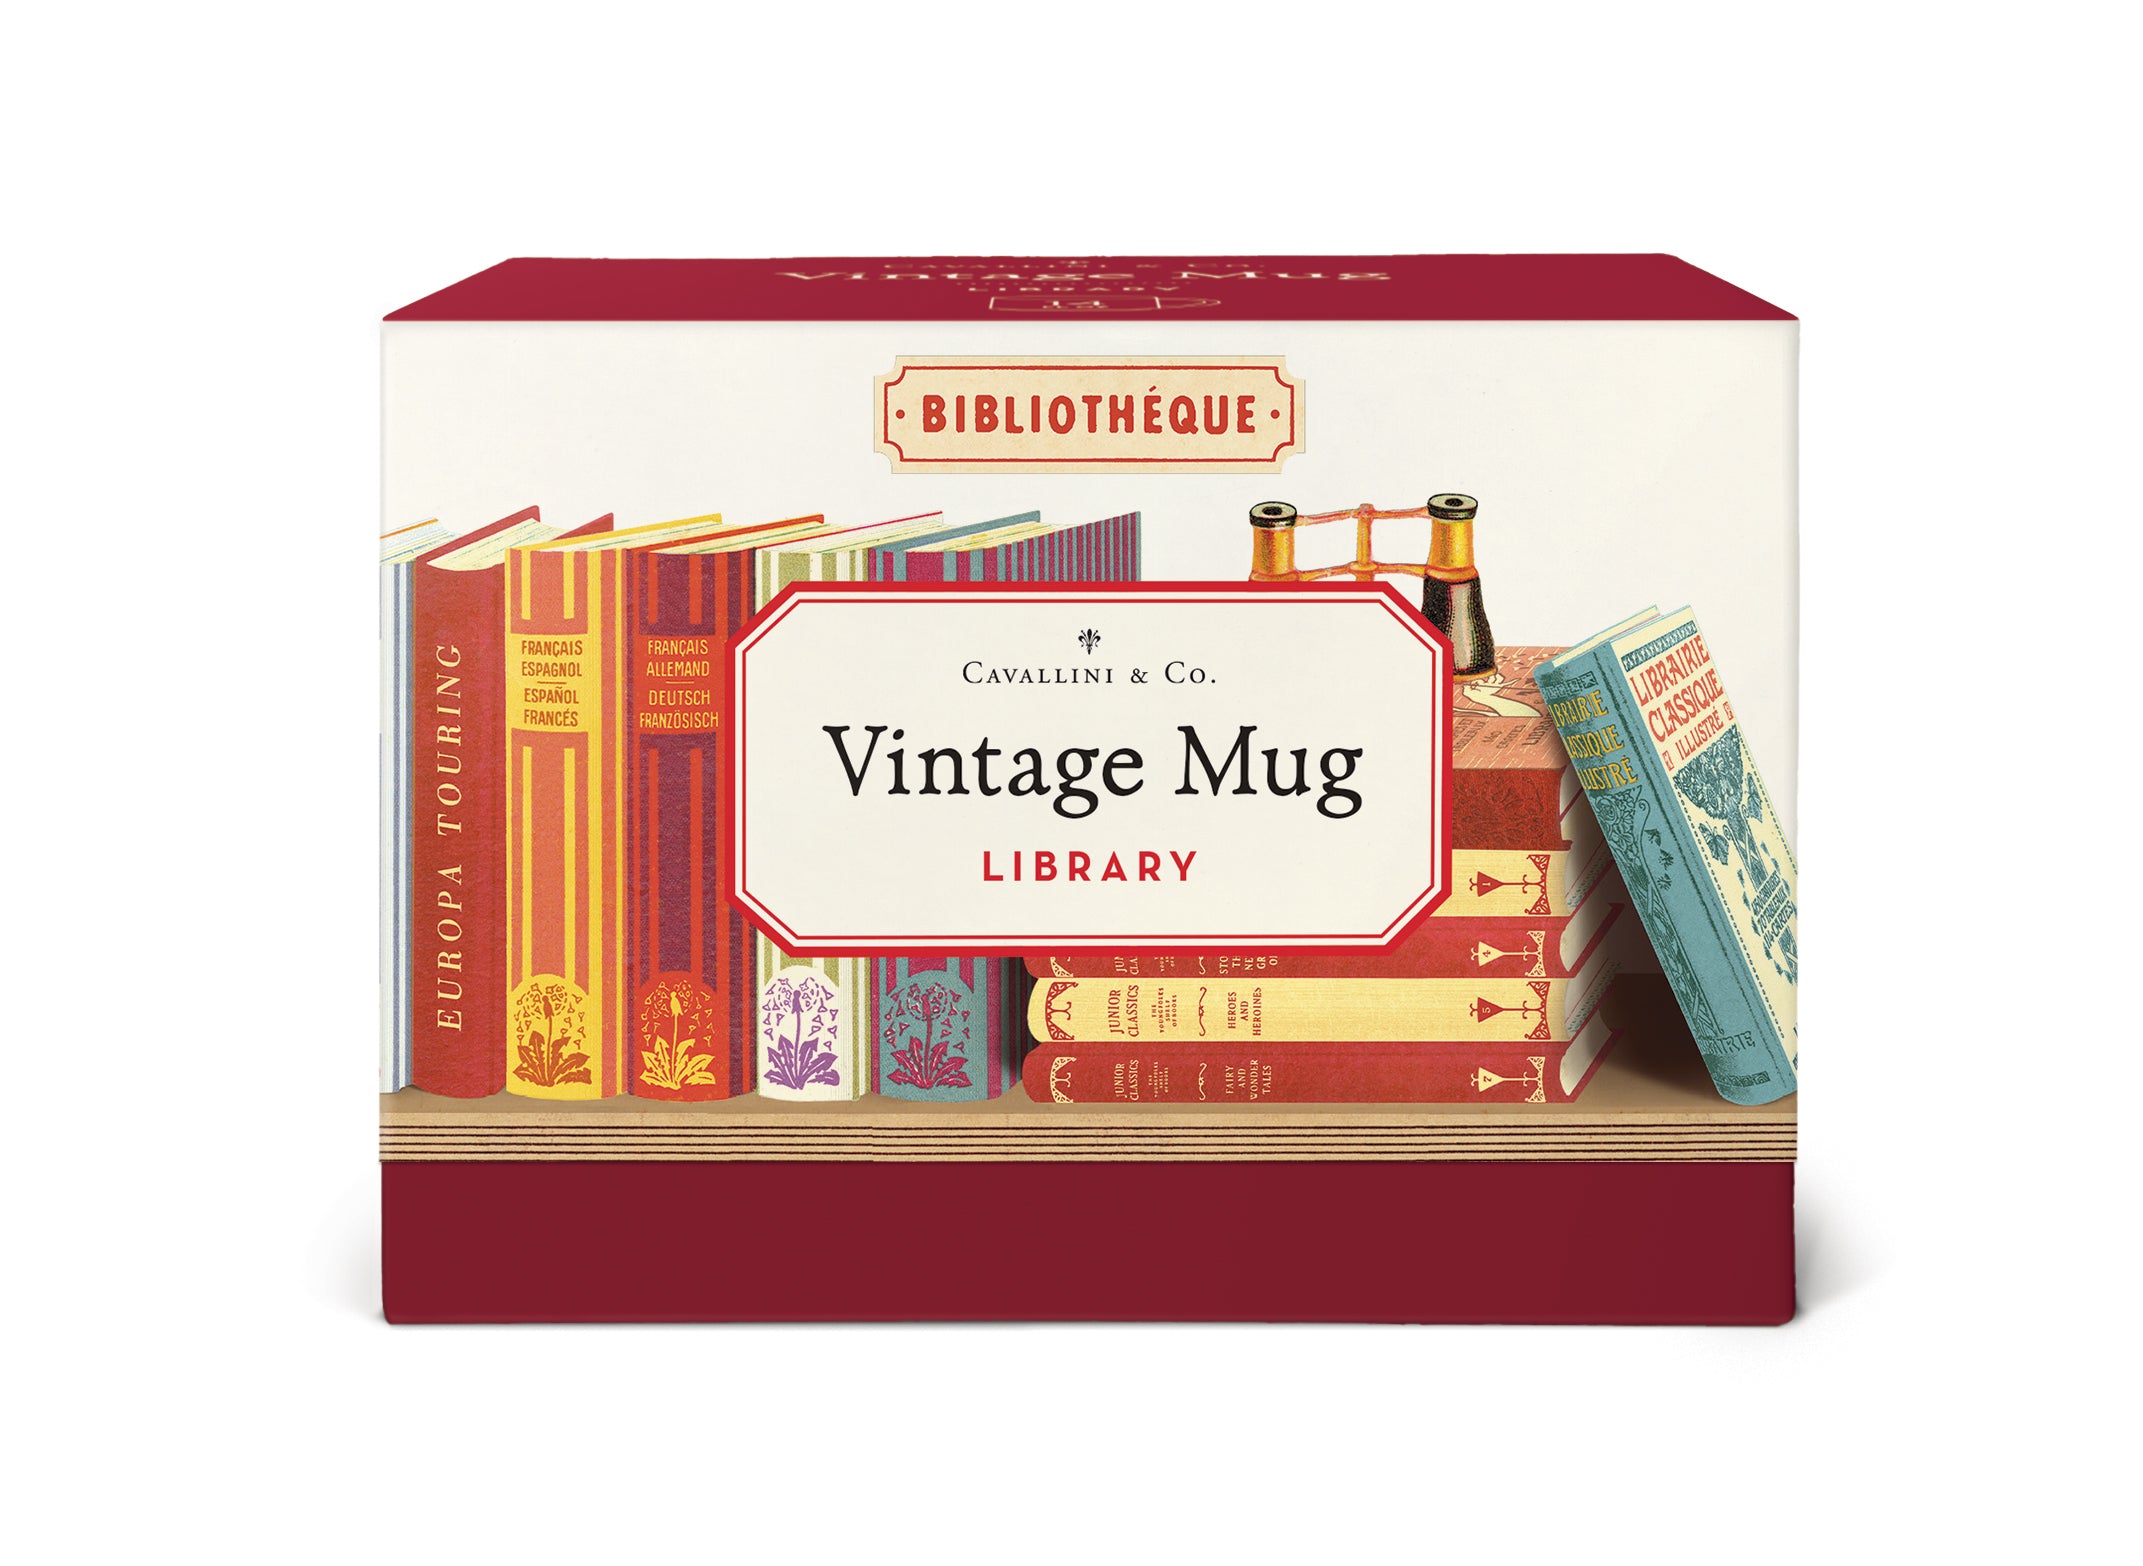 5.5&quot; x 7.6&quot; ceramic mug packaged in a decorative box with library book design.